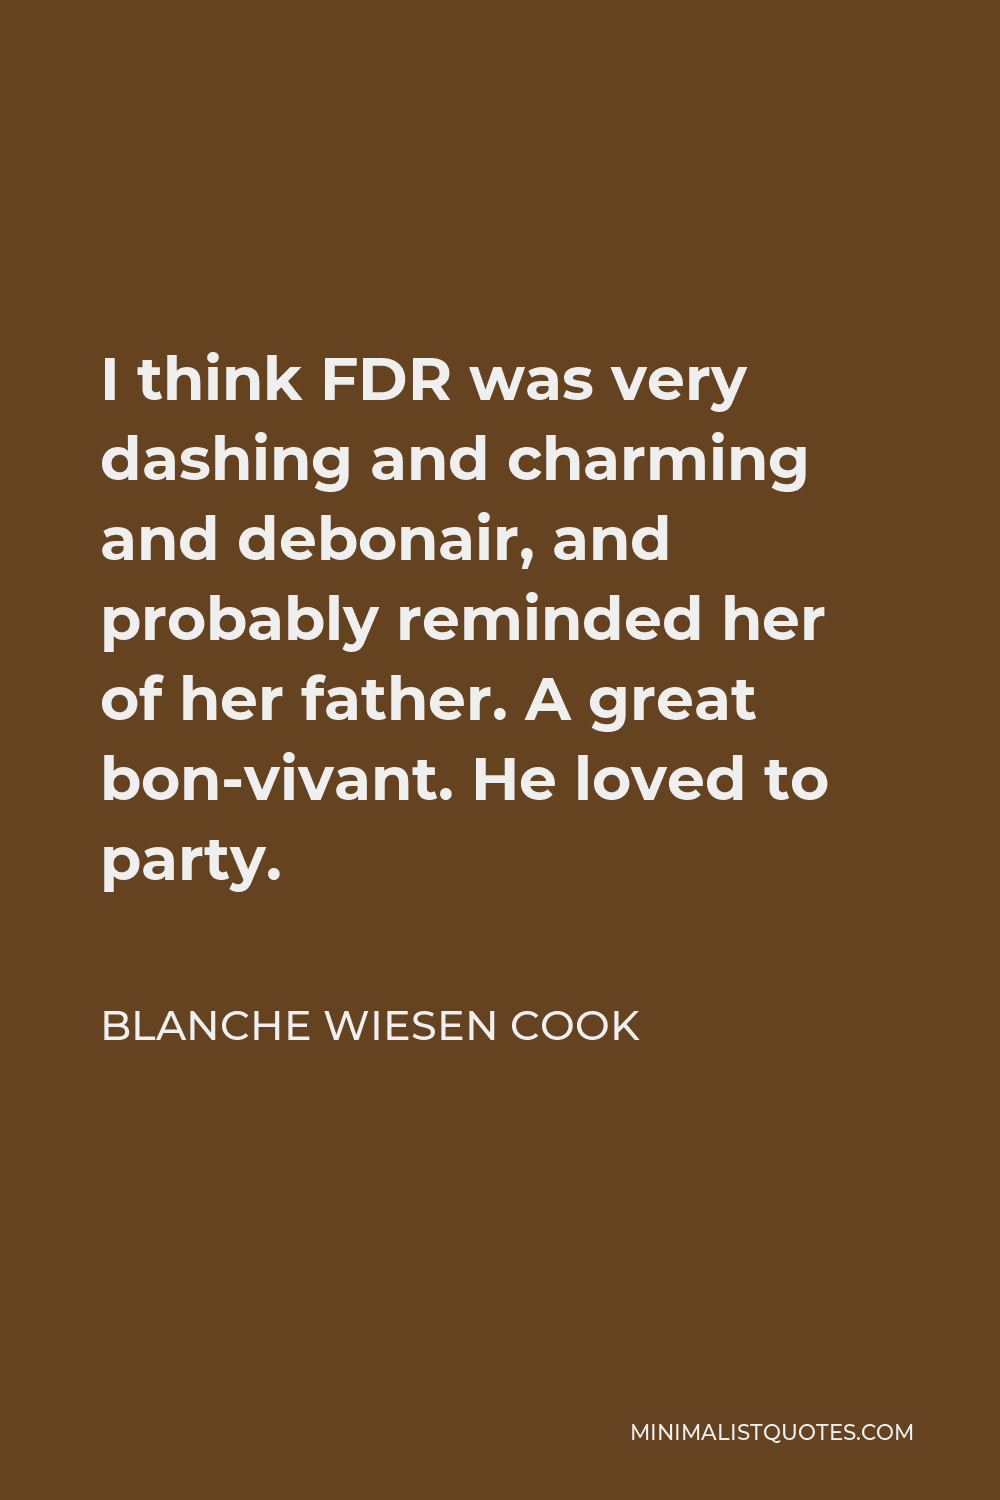 Blanche Wiesen Cook Quote - I think FDR was very dashing and charming and debonair, and probably reminded her of her father. A great bon-vivant. He loved to party.